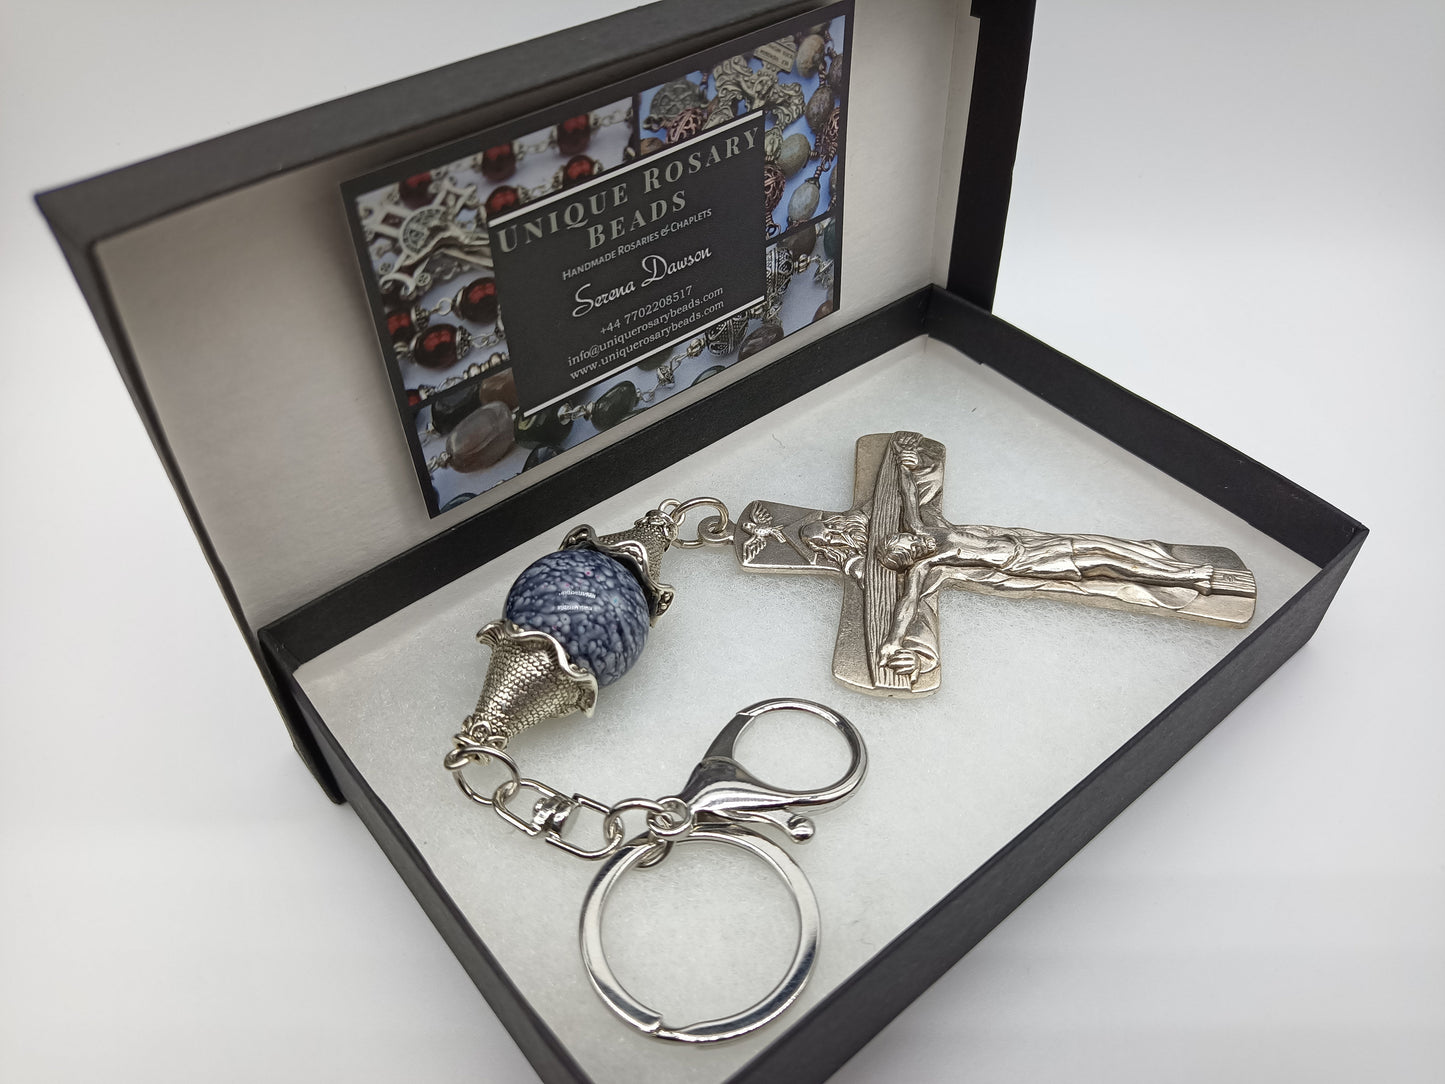 Holy Trinity Large silver Crucifix, Large Wall Crucifix Hanging key fob, Silver Hanging Crucifix prayer beads, Vatican City Crucifix.